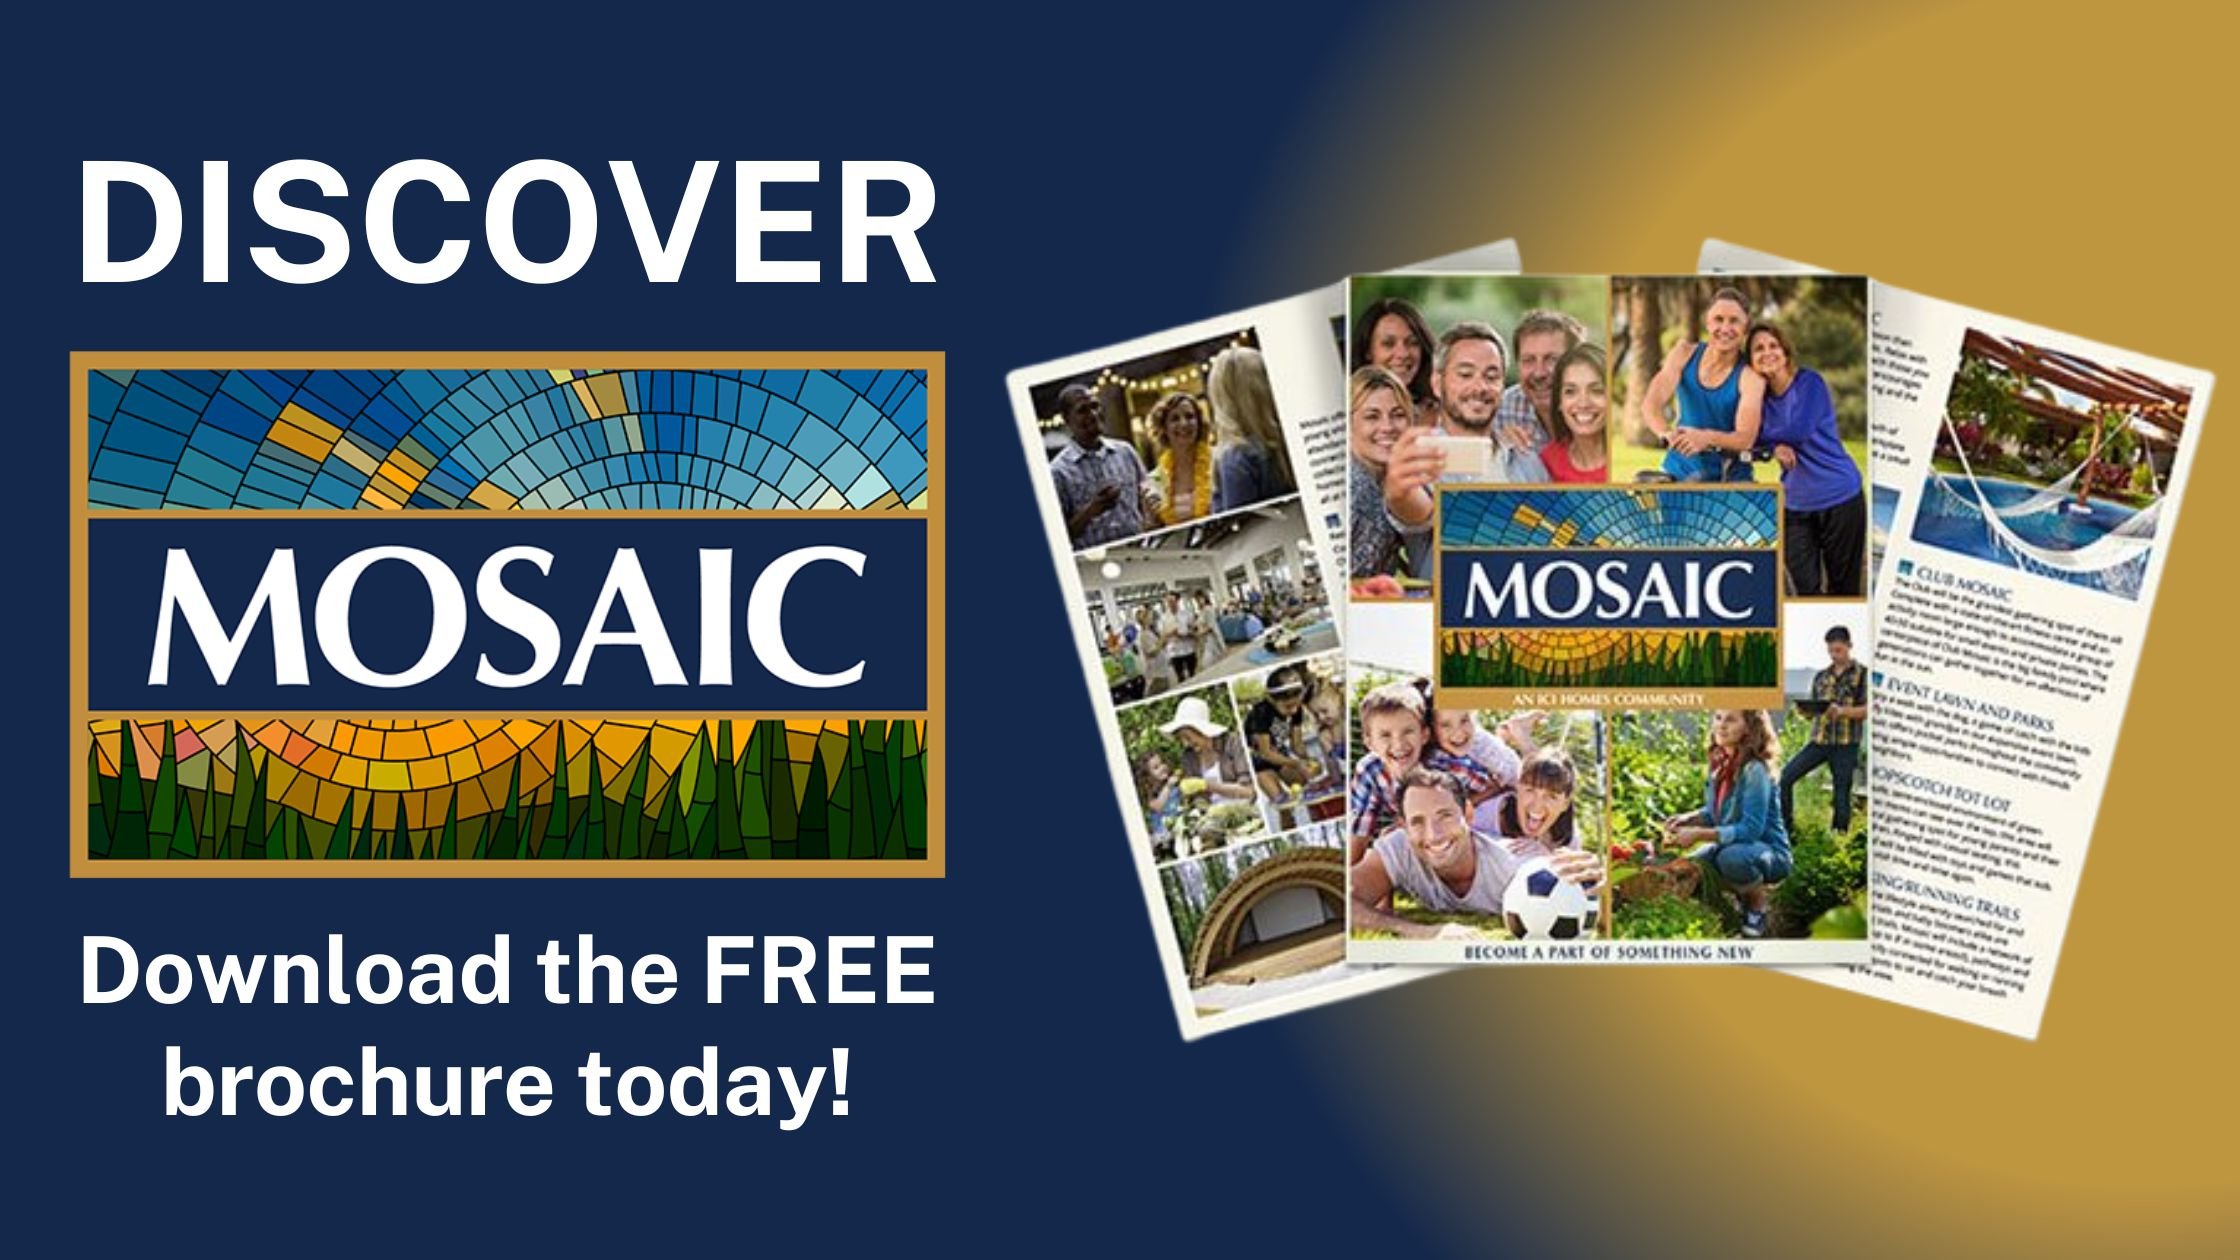 Discover Mosaic and Download the Free Brochure - Mosaic